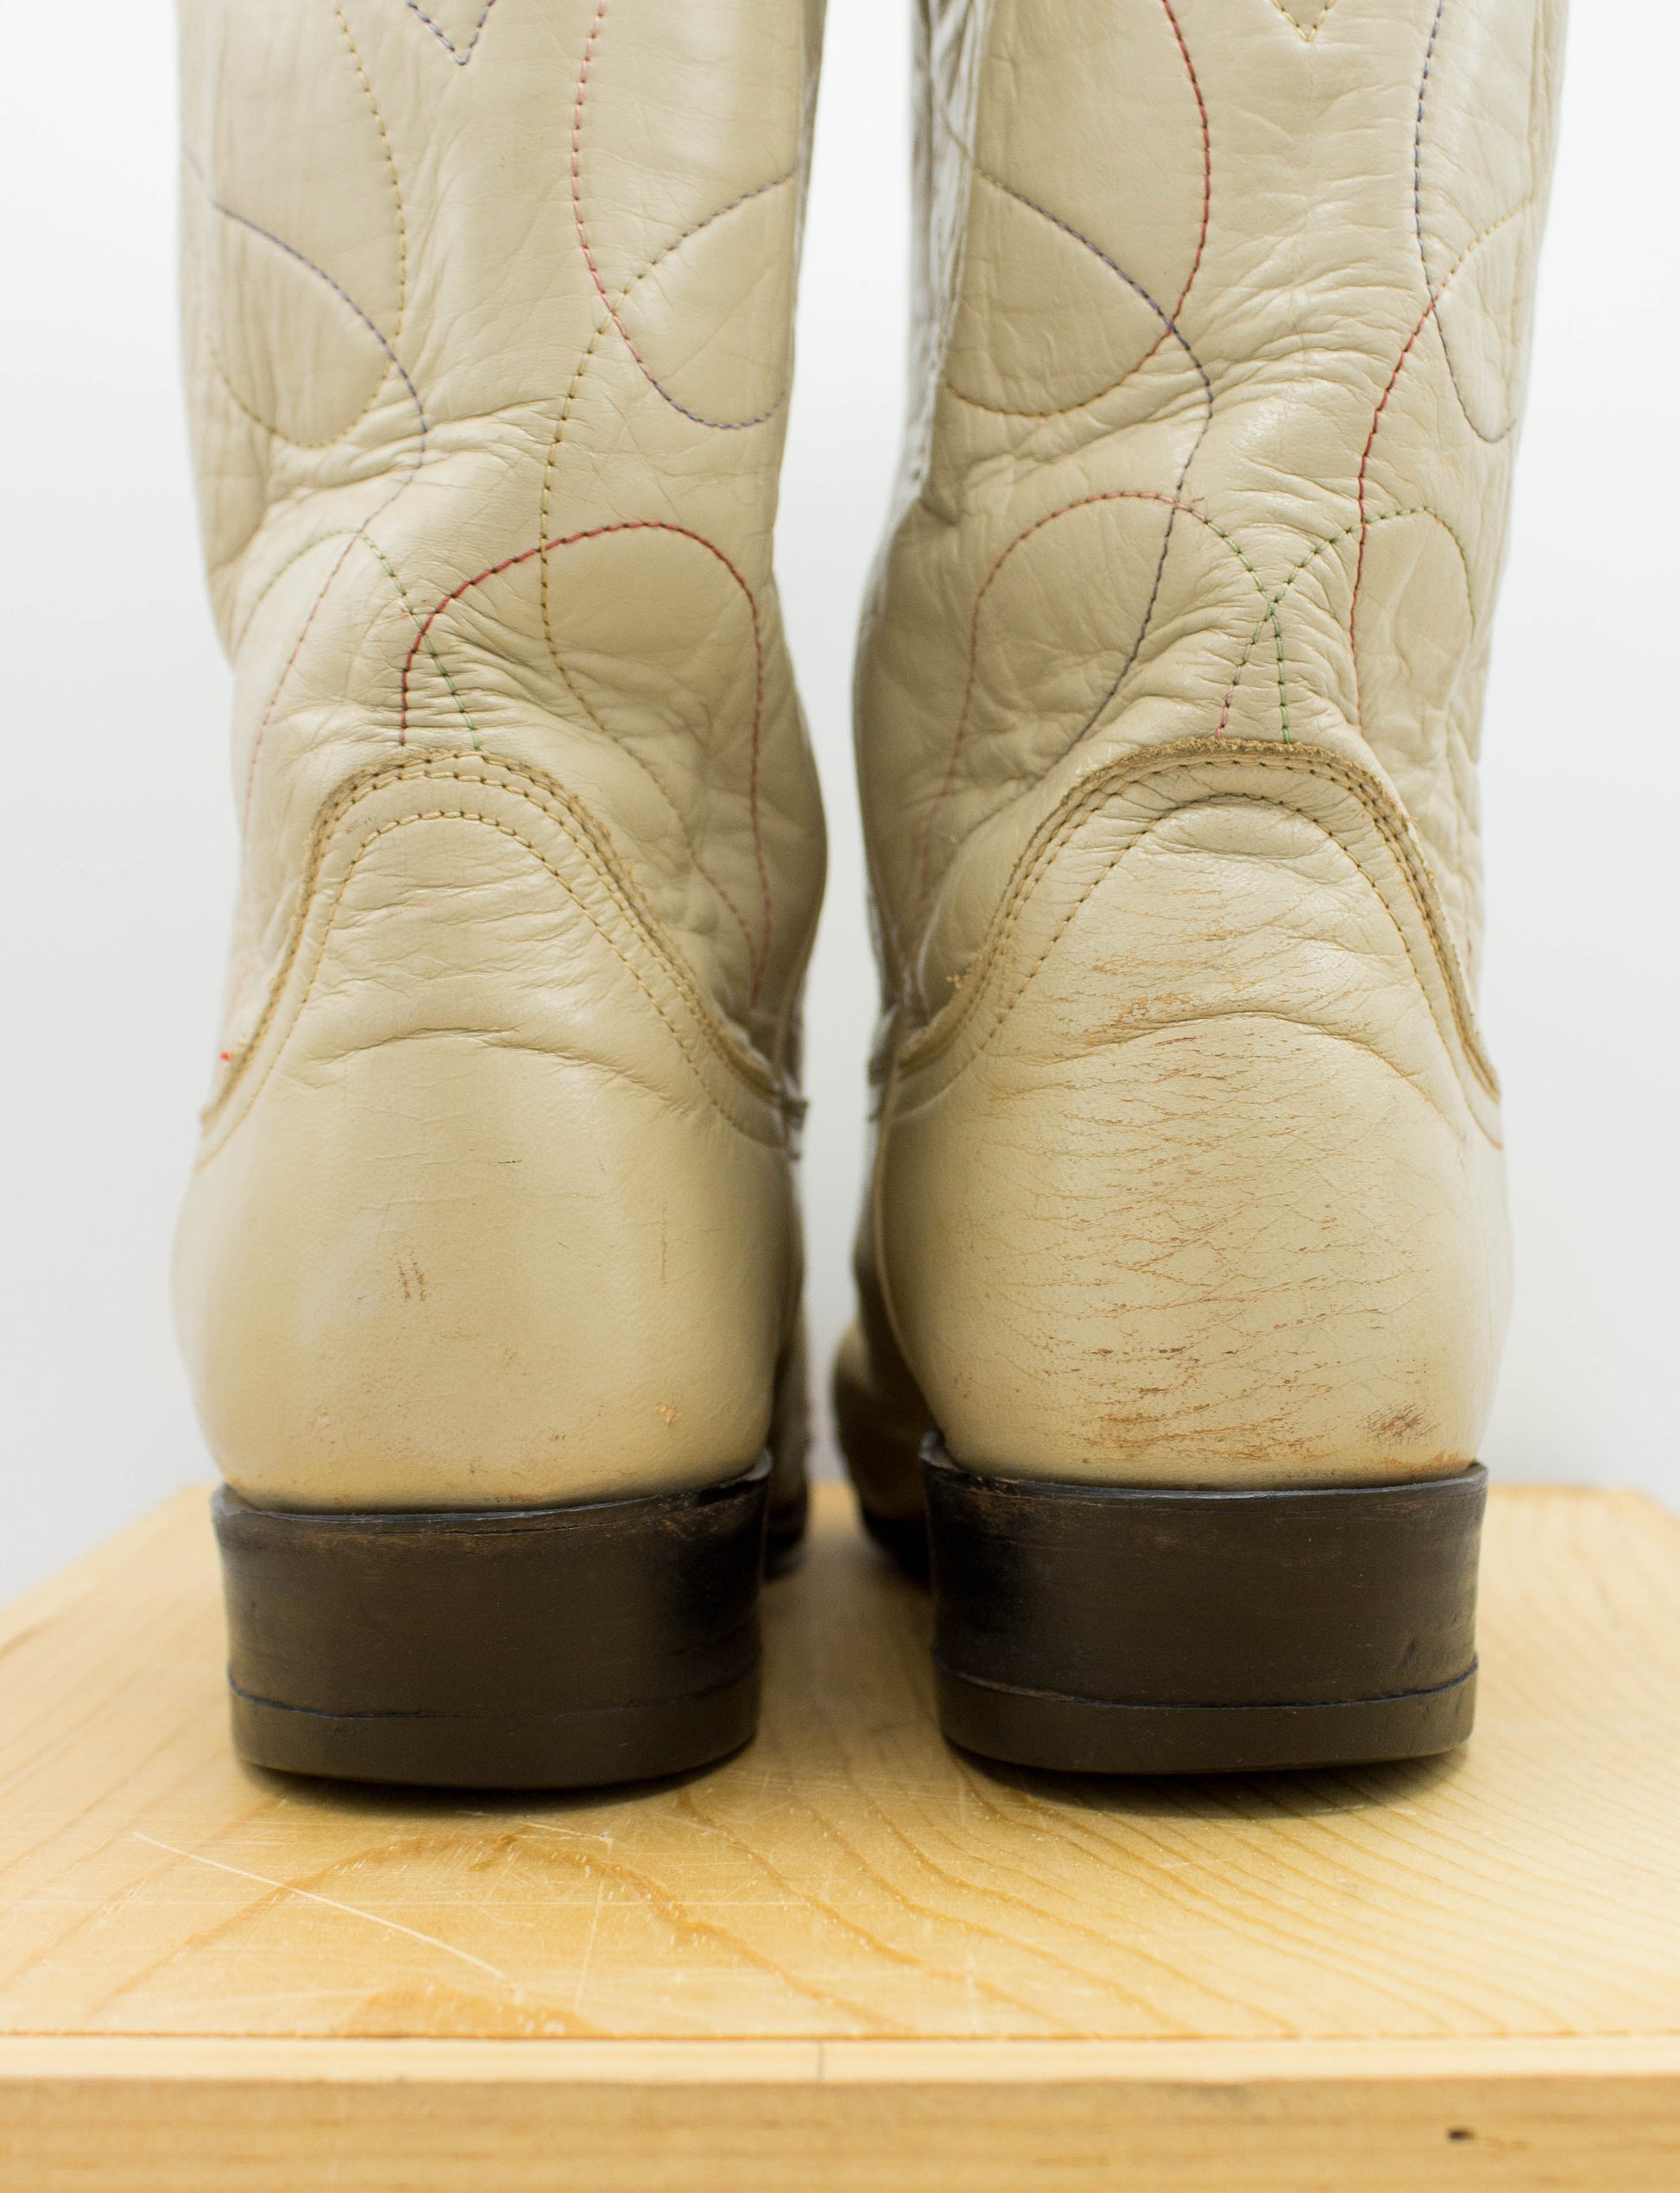 Vintage Women's Cream Tony Lama Cowgirl Boots With Snakeskin Toecap Size 5.5